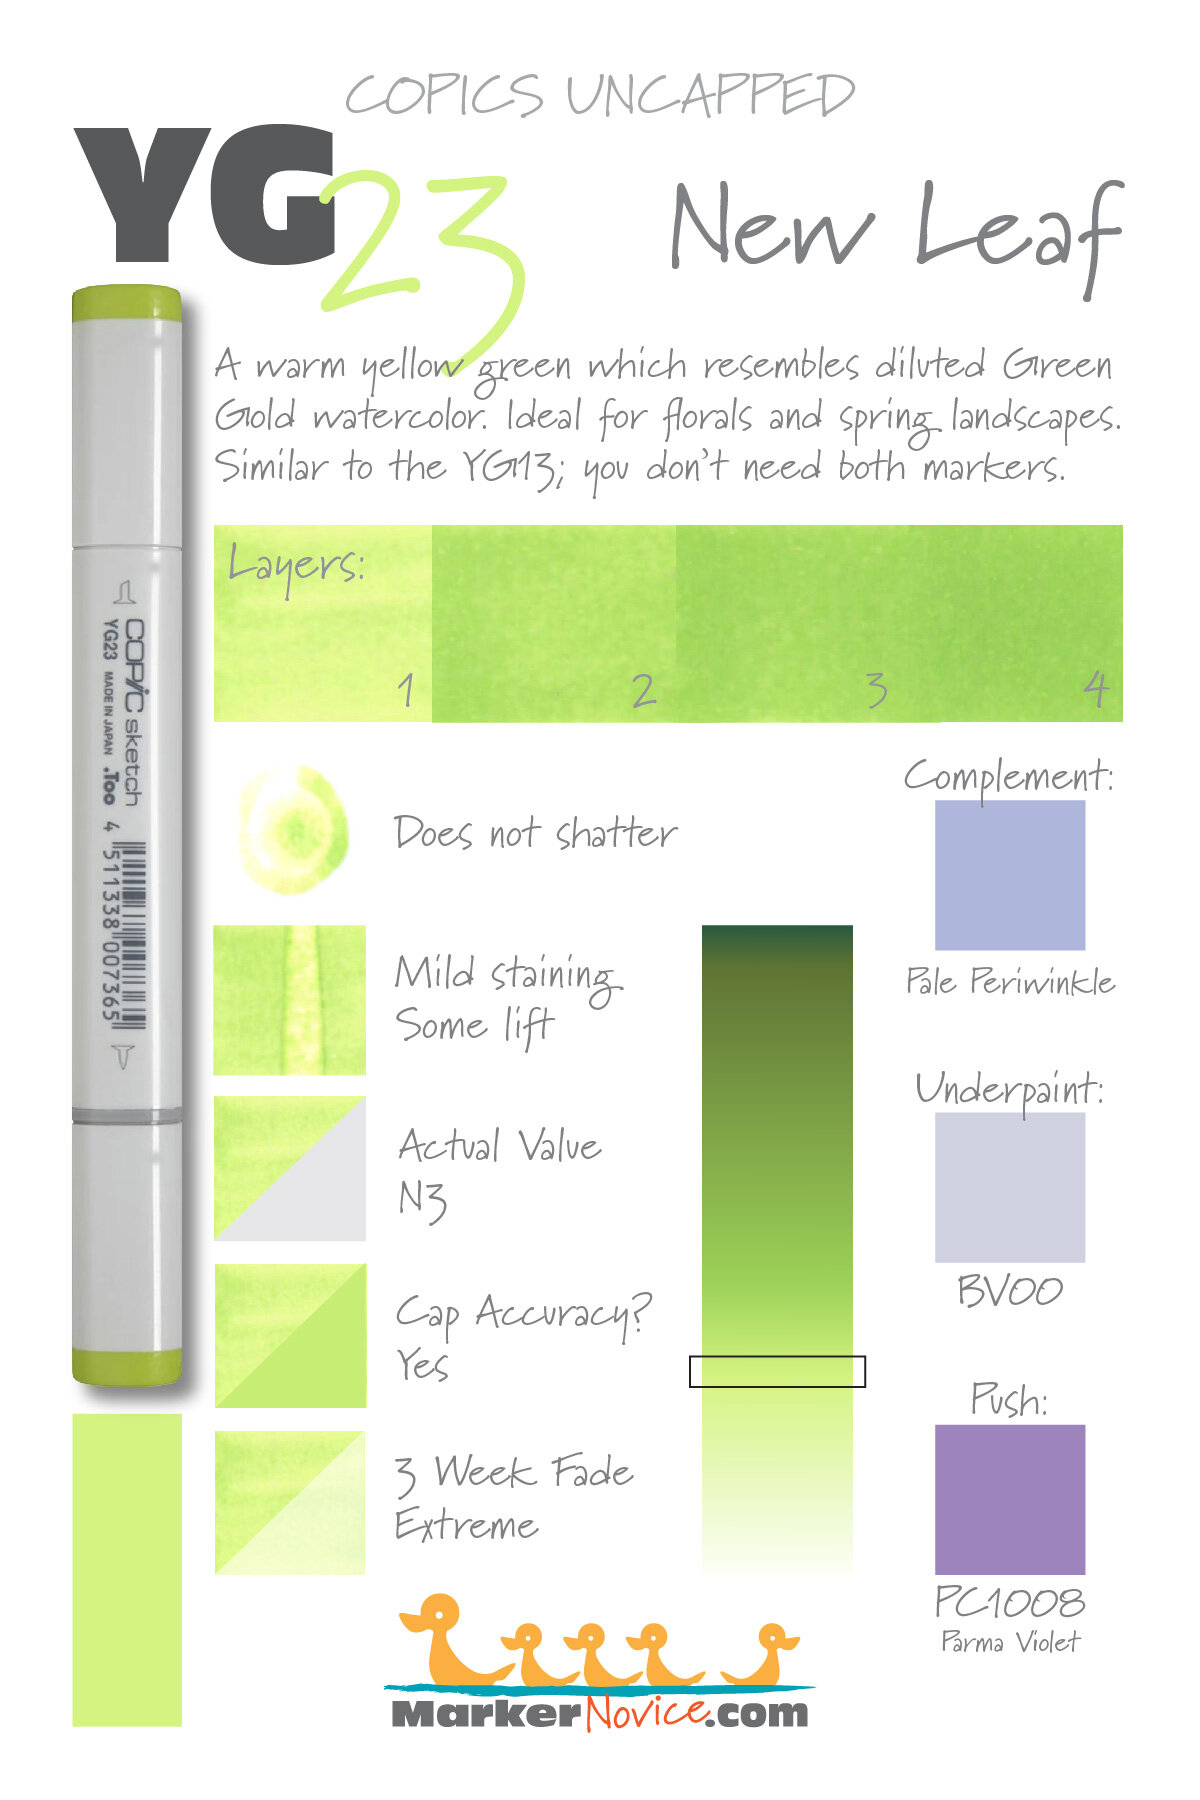 Copic Markers Original Standard Marker With Replacable Nib Yg23 New Leaf 